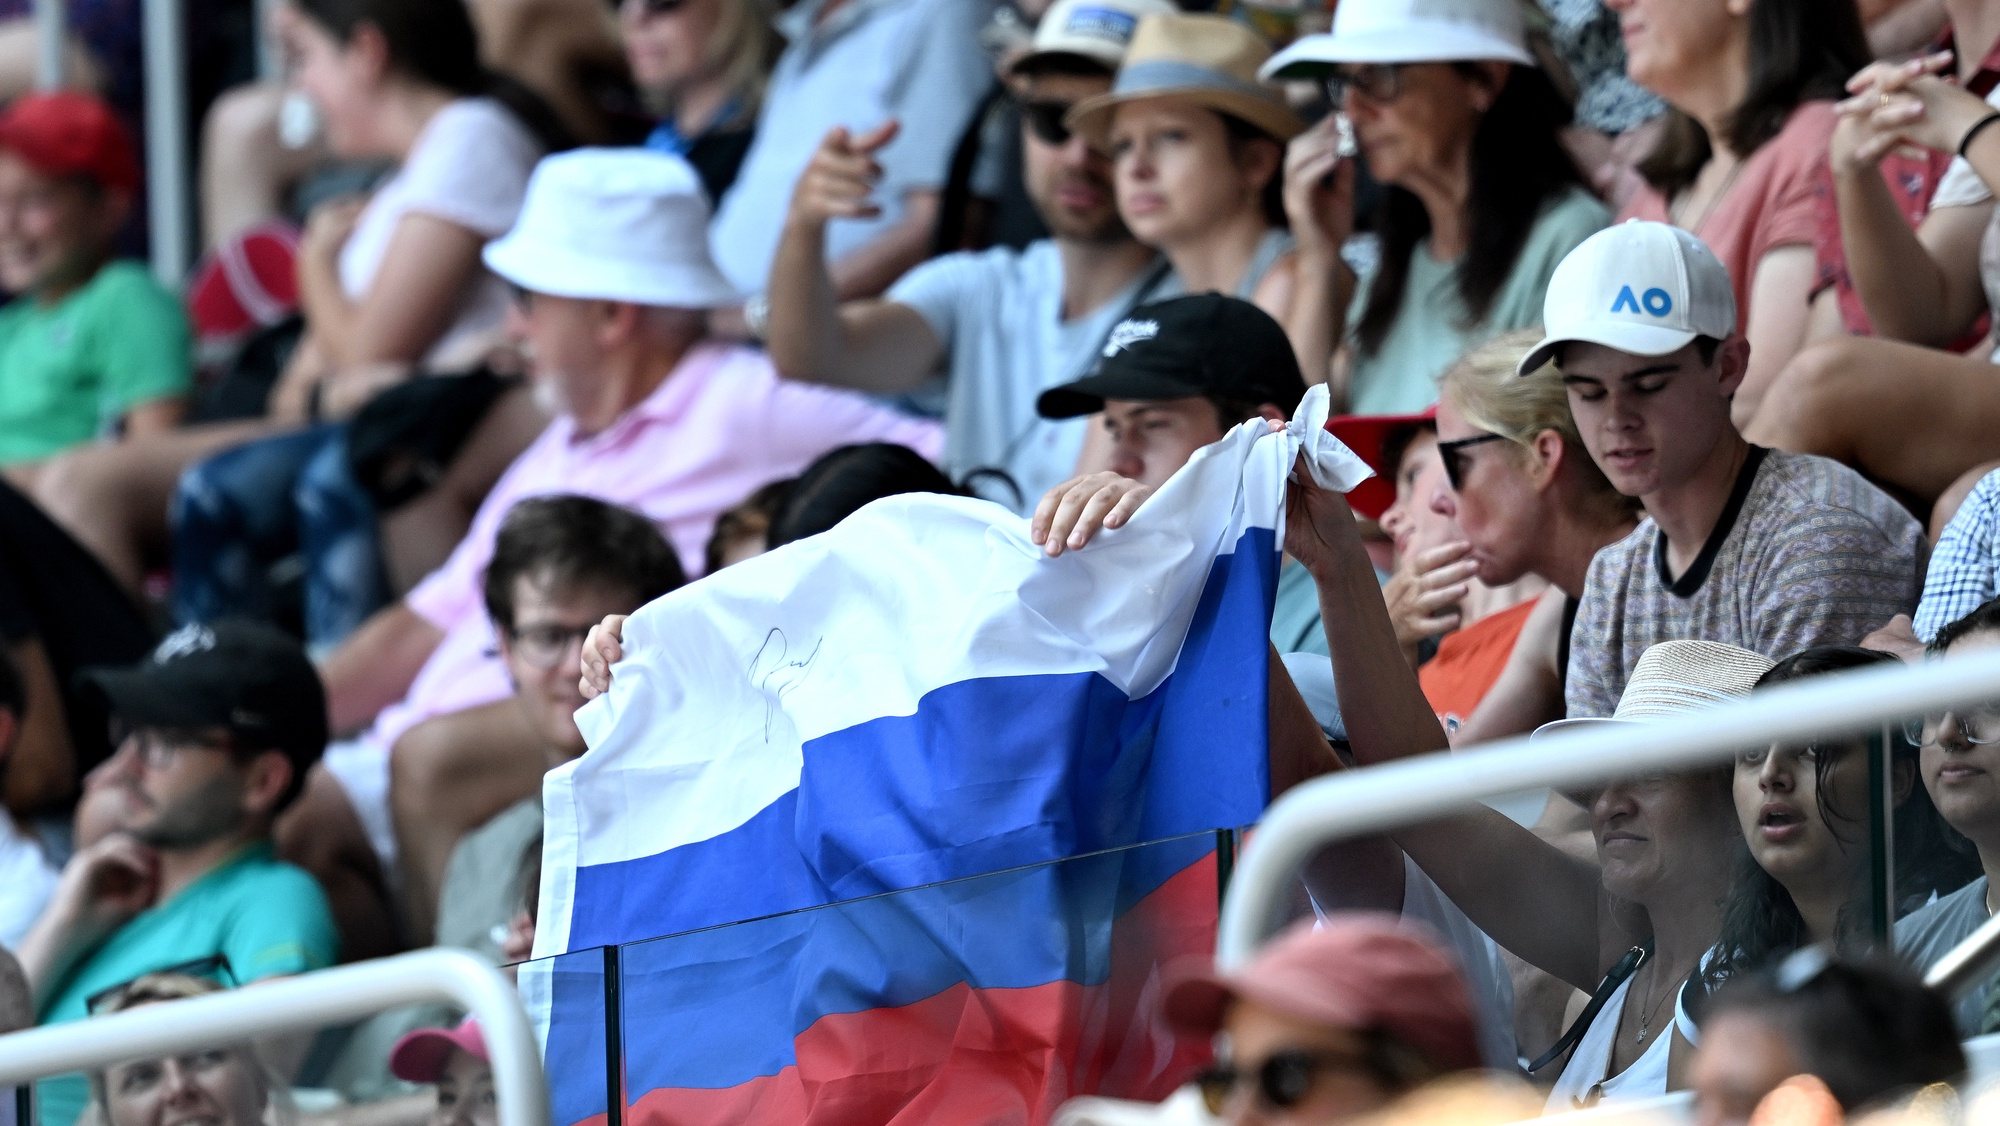 epa10409884 A Russian flag is displayed by spectators during the first round singles match between Andrey Rublev of Russia and Dominic Them of Austria at the 2023 Australian Open tennis tournament at Melbourne Park in Melbourne, Australia, 17 January 2023.  EPA/LUKAS COCH  AUSTRALIA AND NEW ZEALAND OUT